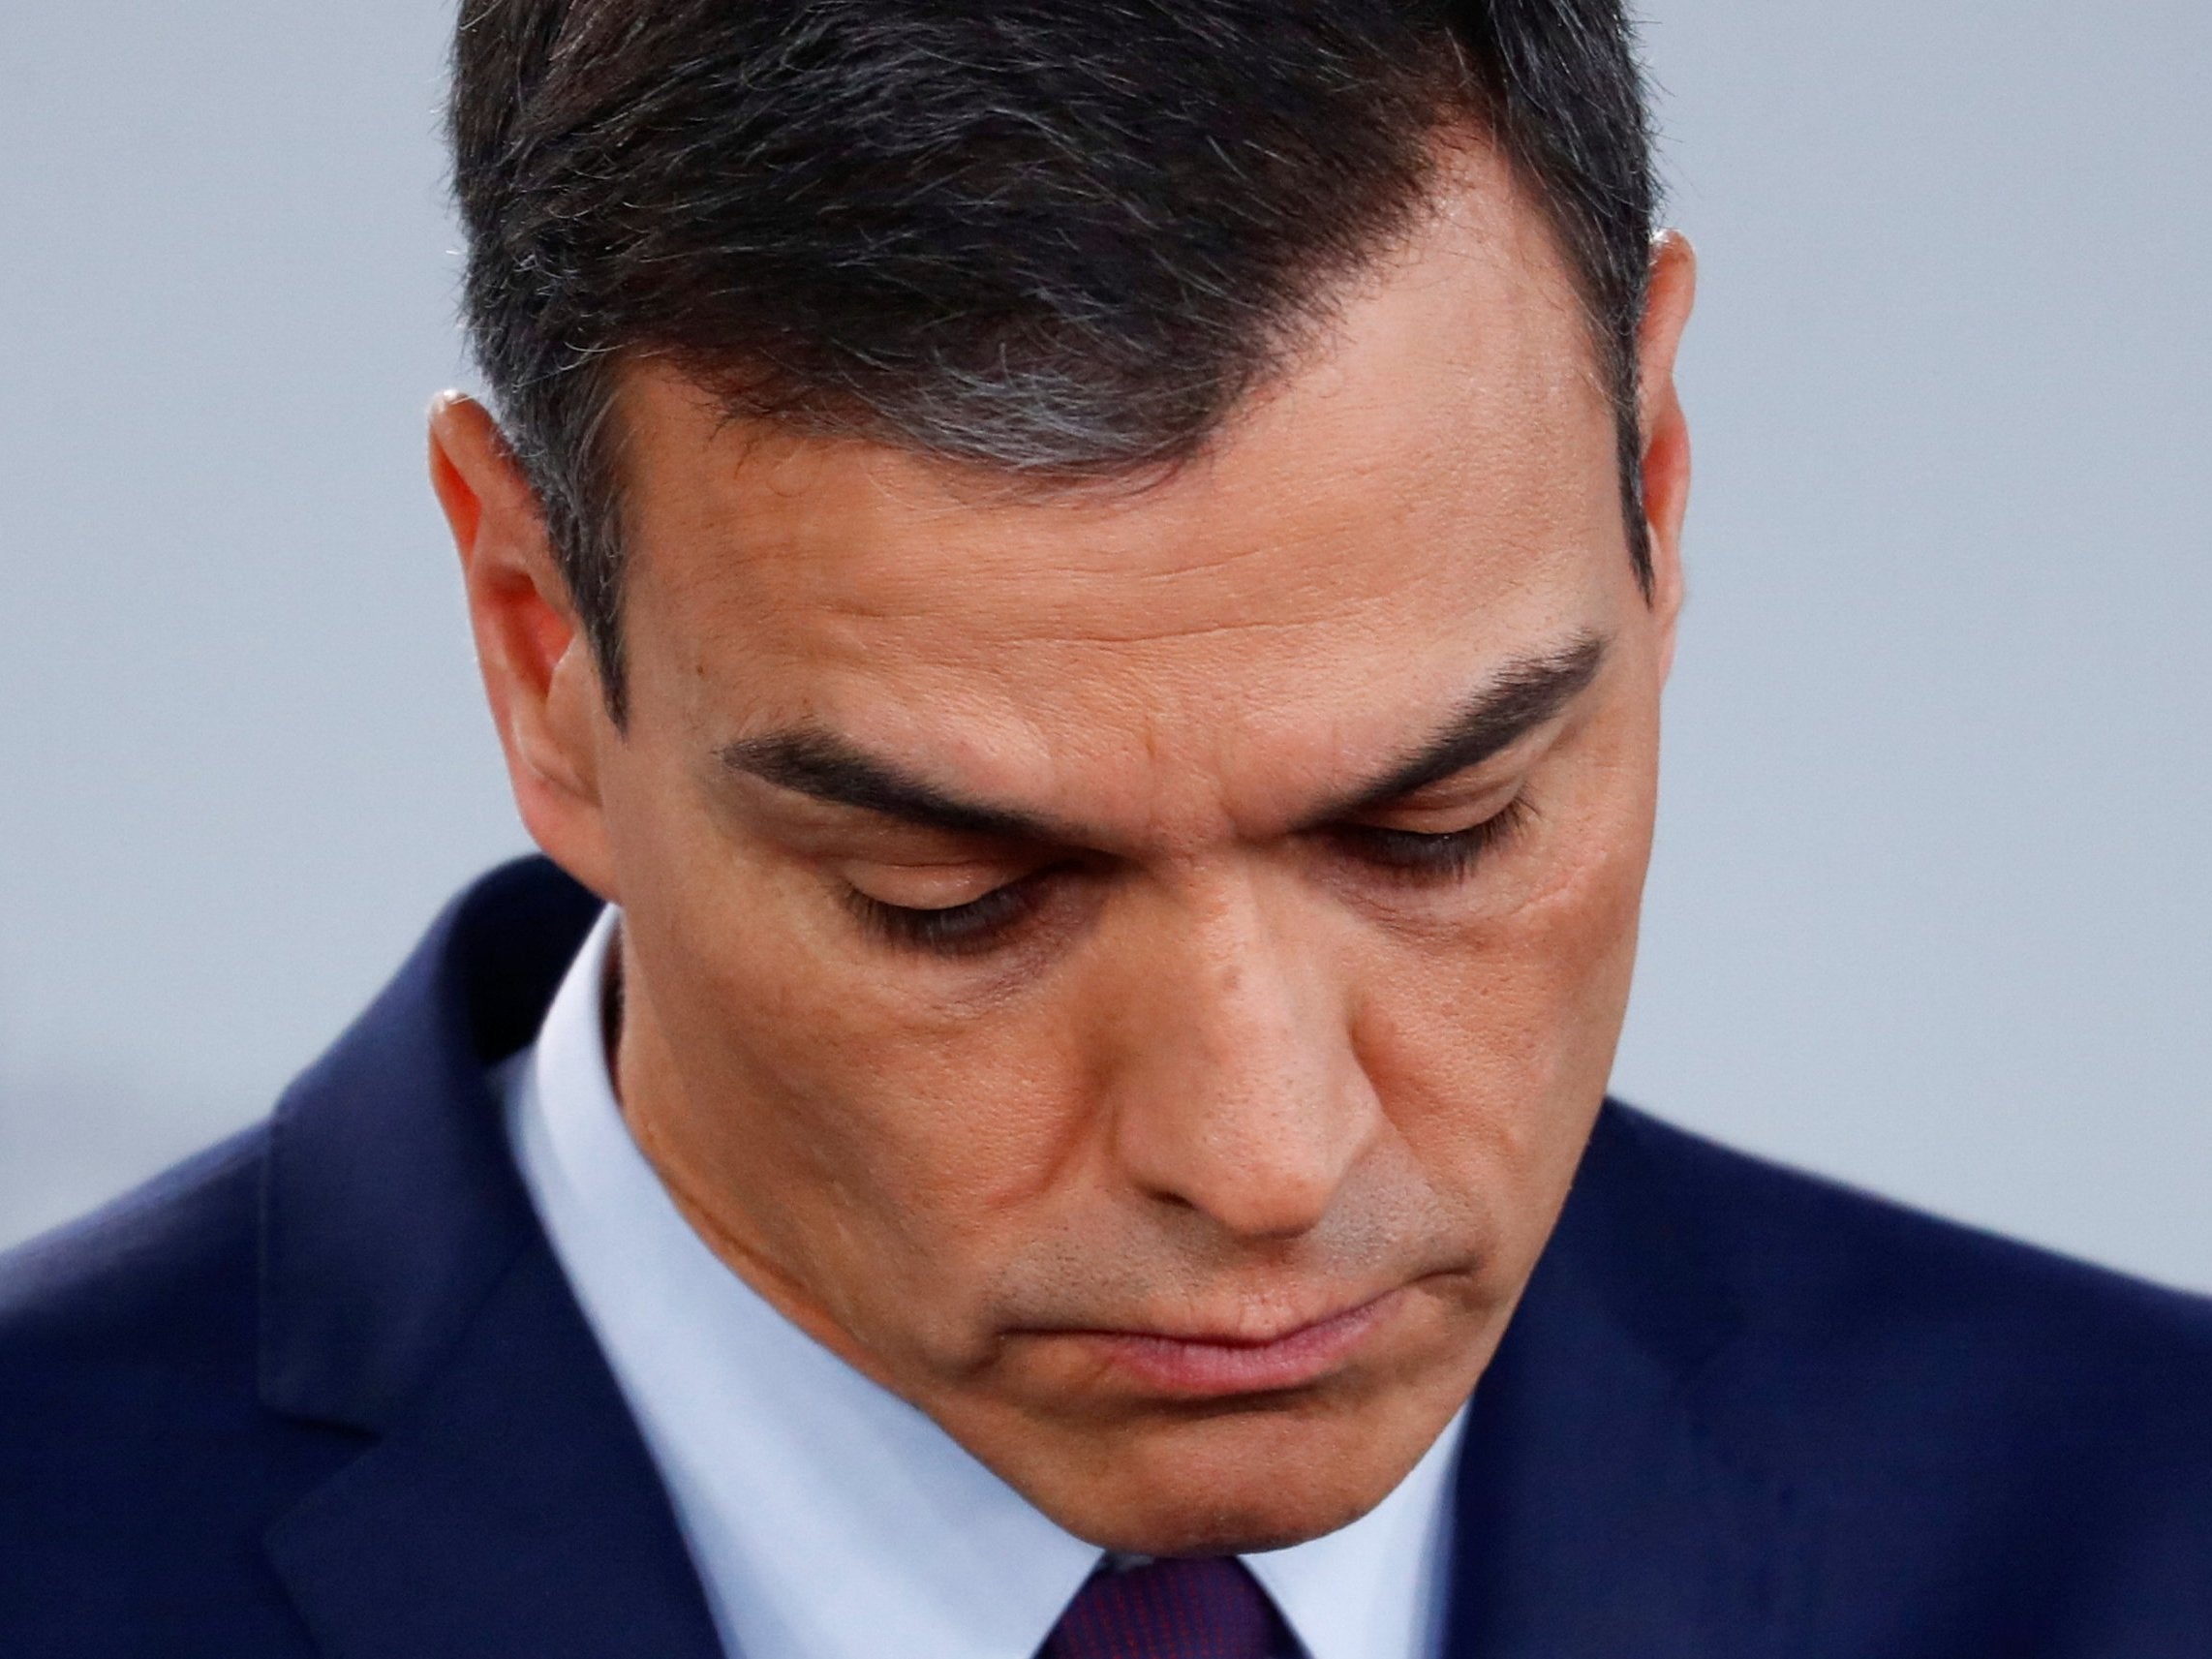 Spain's Prime Minister Pedro Sanchez during Friday's news conference